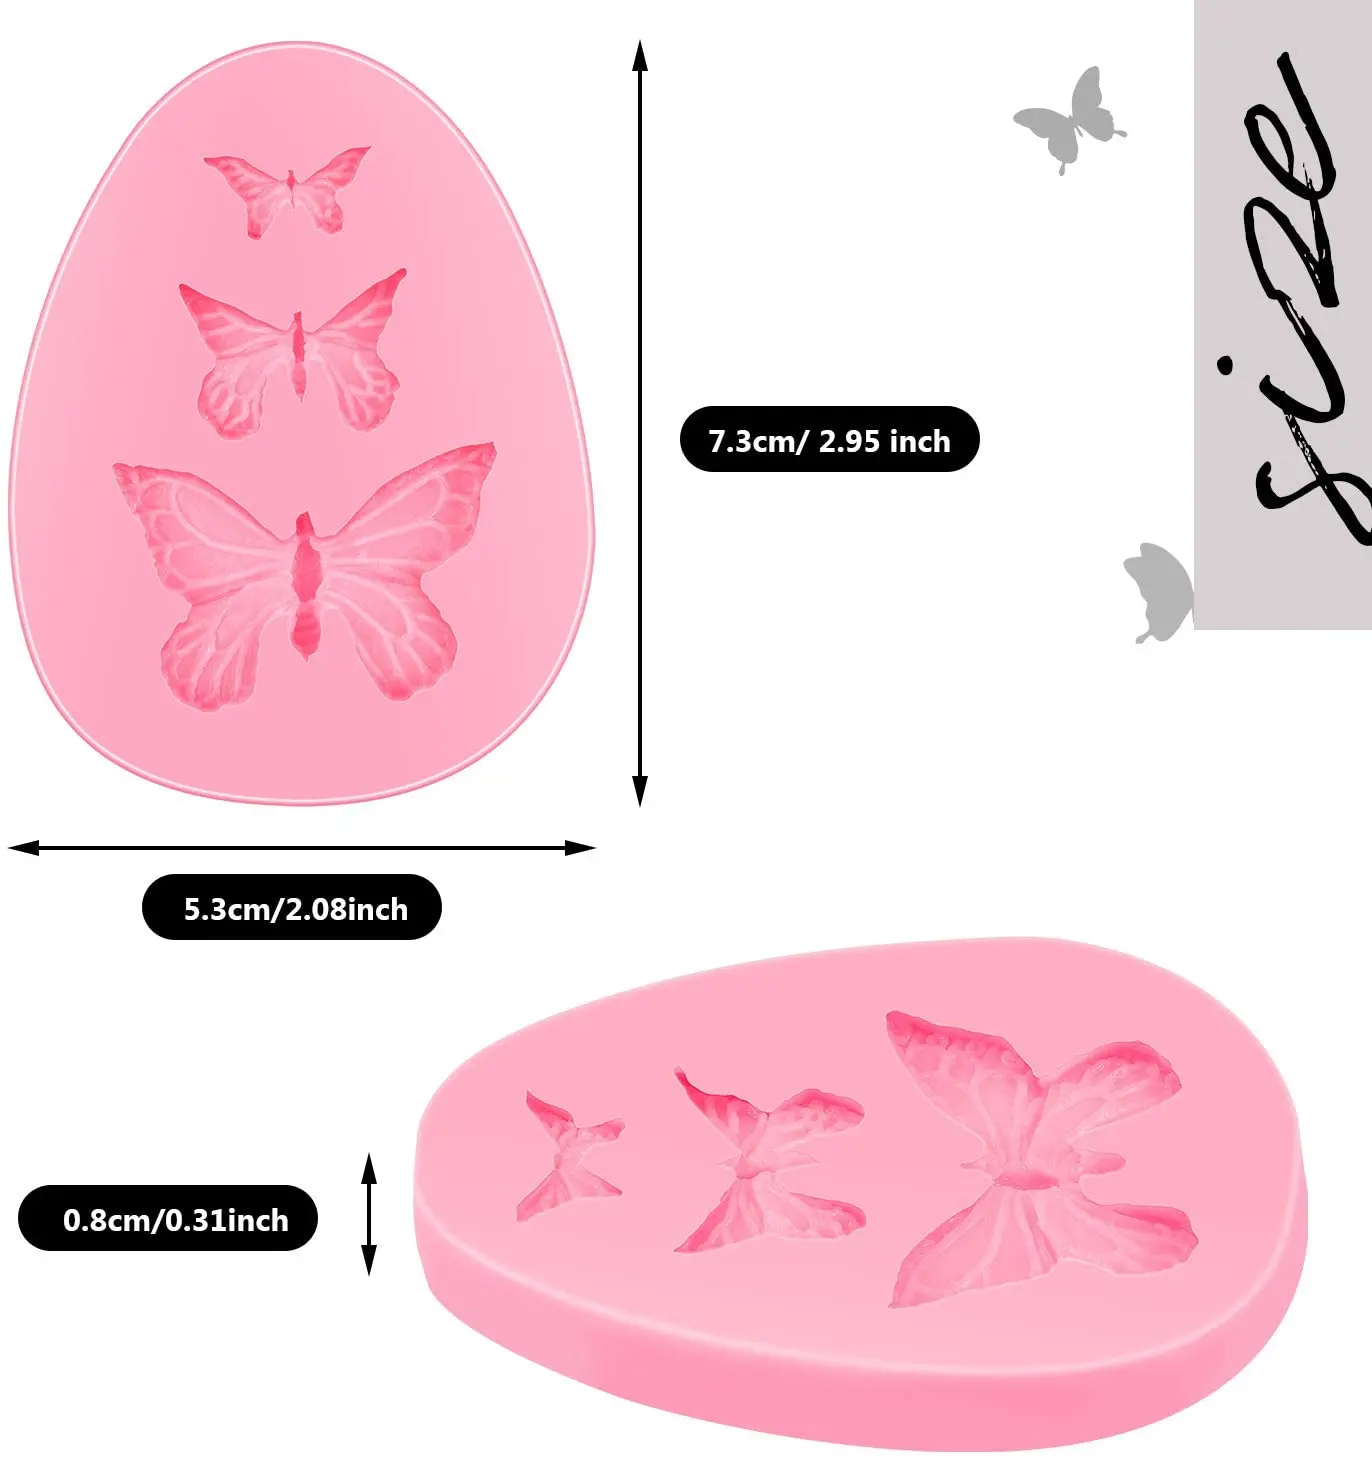 DIY Sugar Crafts 2 pcs Butterfly Silicone Molds,Mini Butterfly Fondant Chocolate Baking Mold Tool for Cake Decorating Polymer Clay Wax 